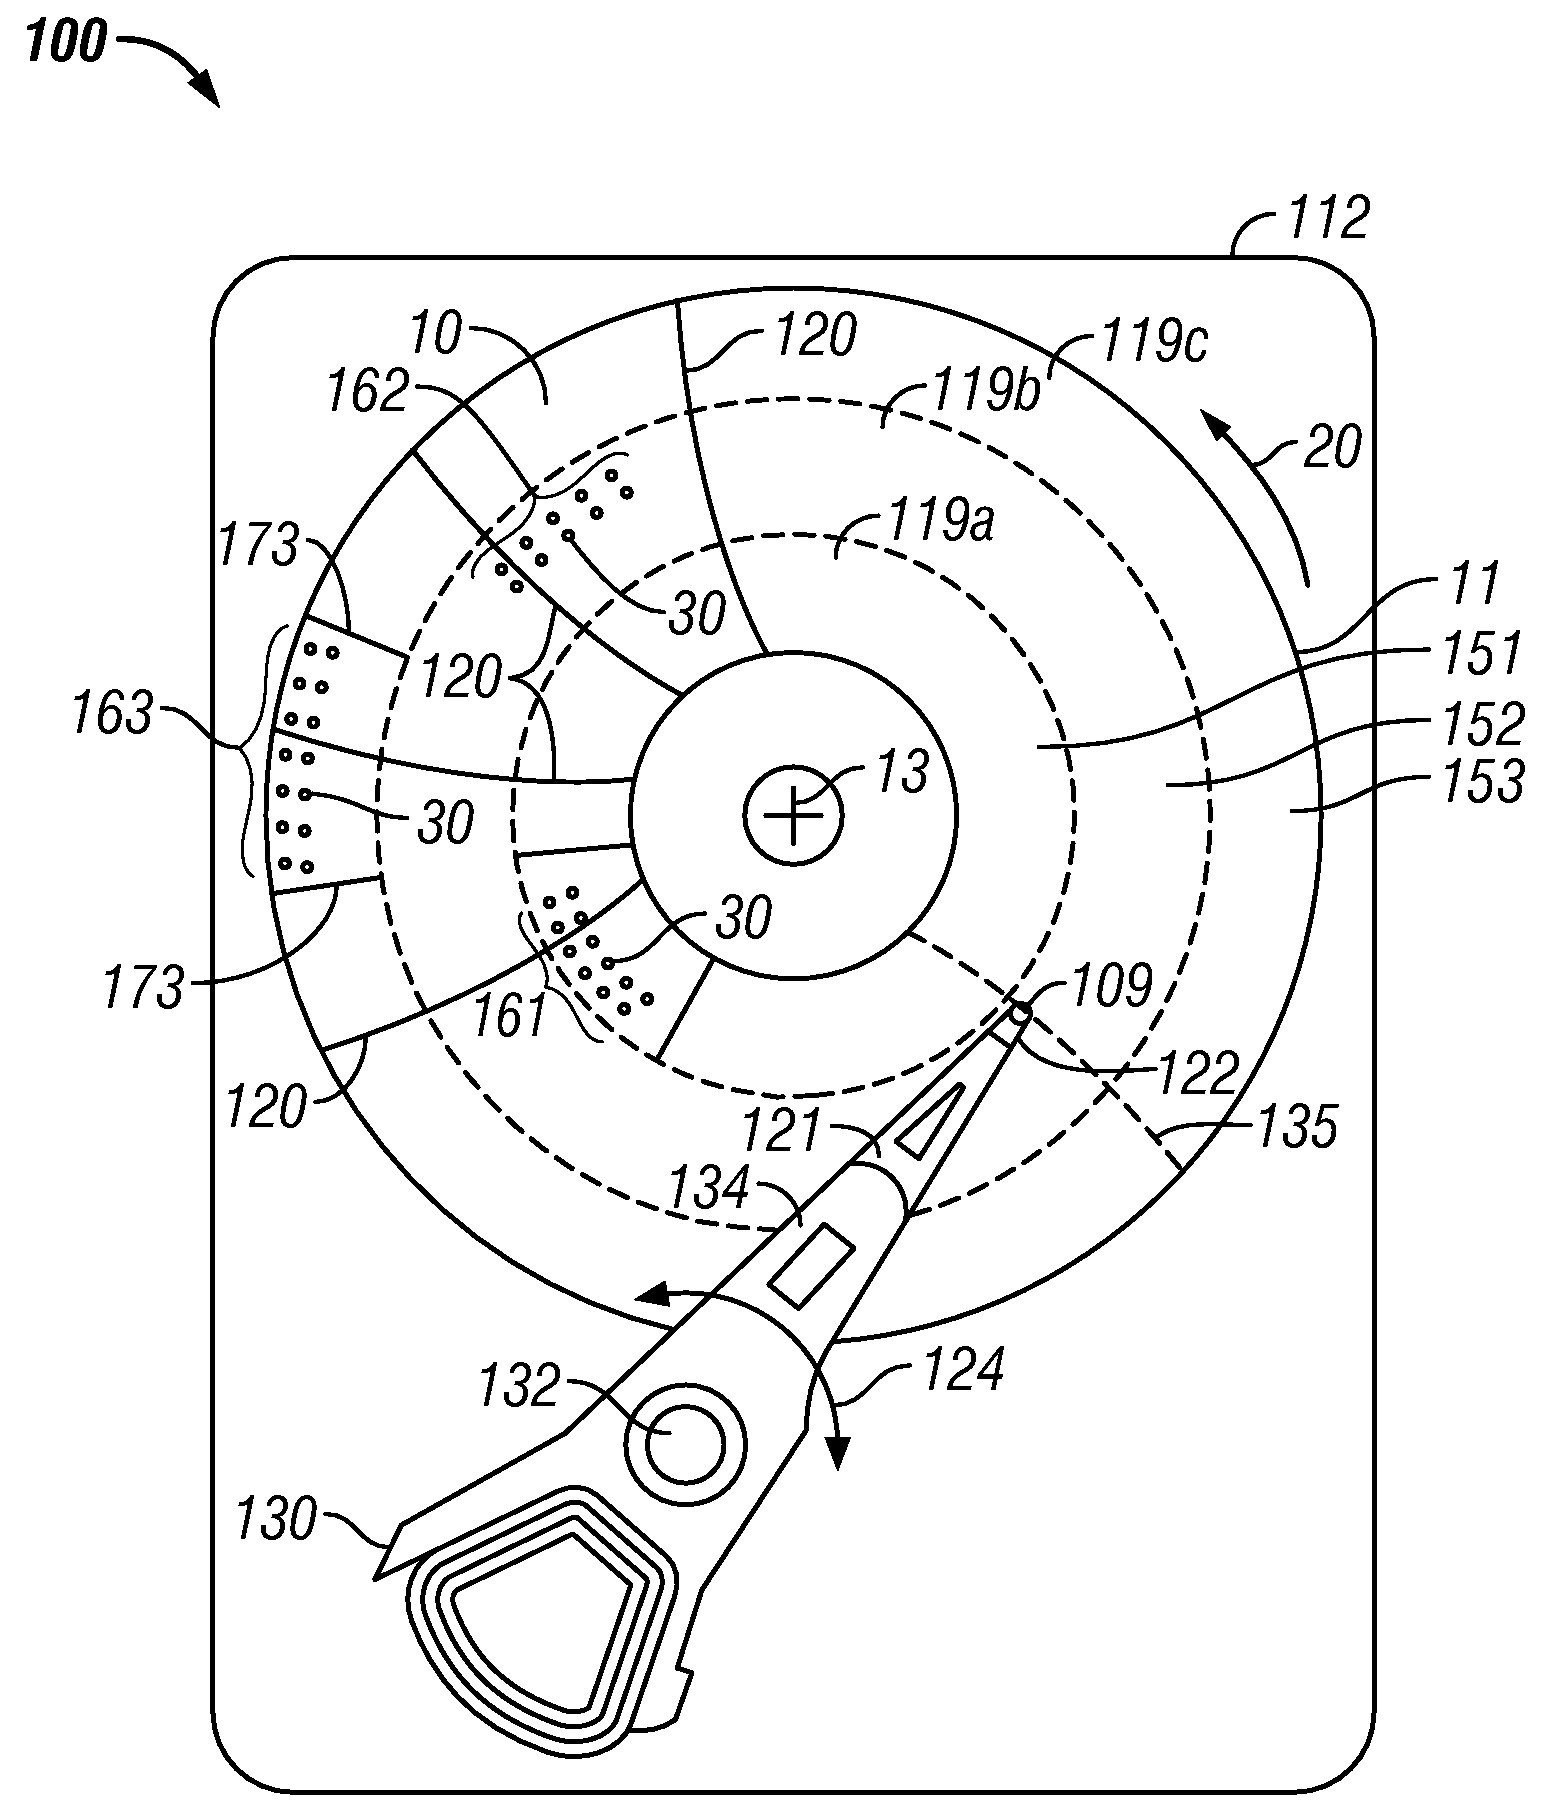 Patterned media magnetic recording disk drive with write clock phase adjustment for data pattern circumferential misalignment